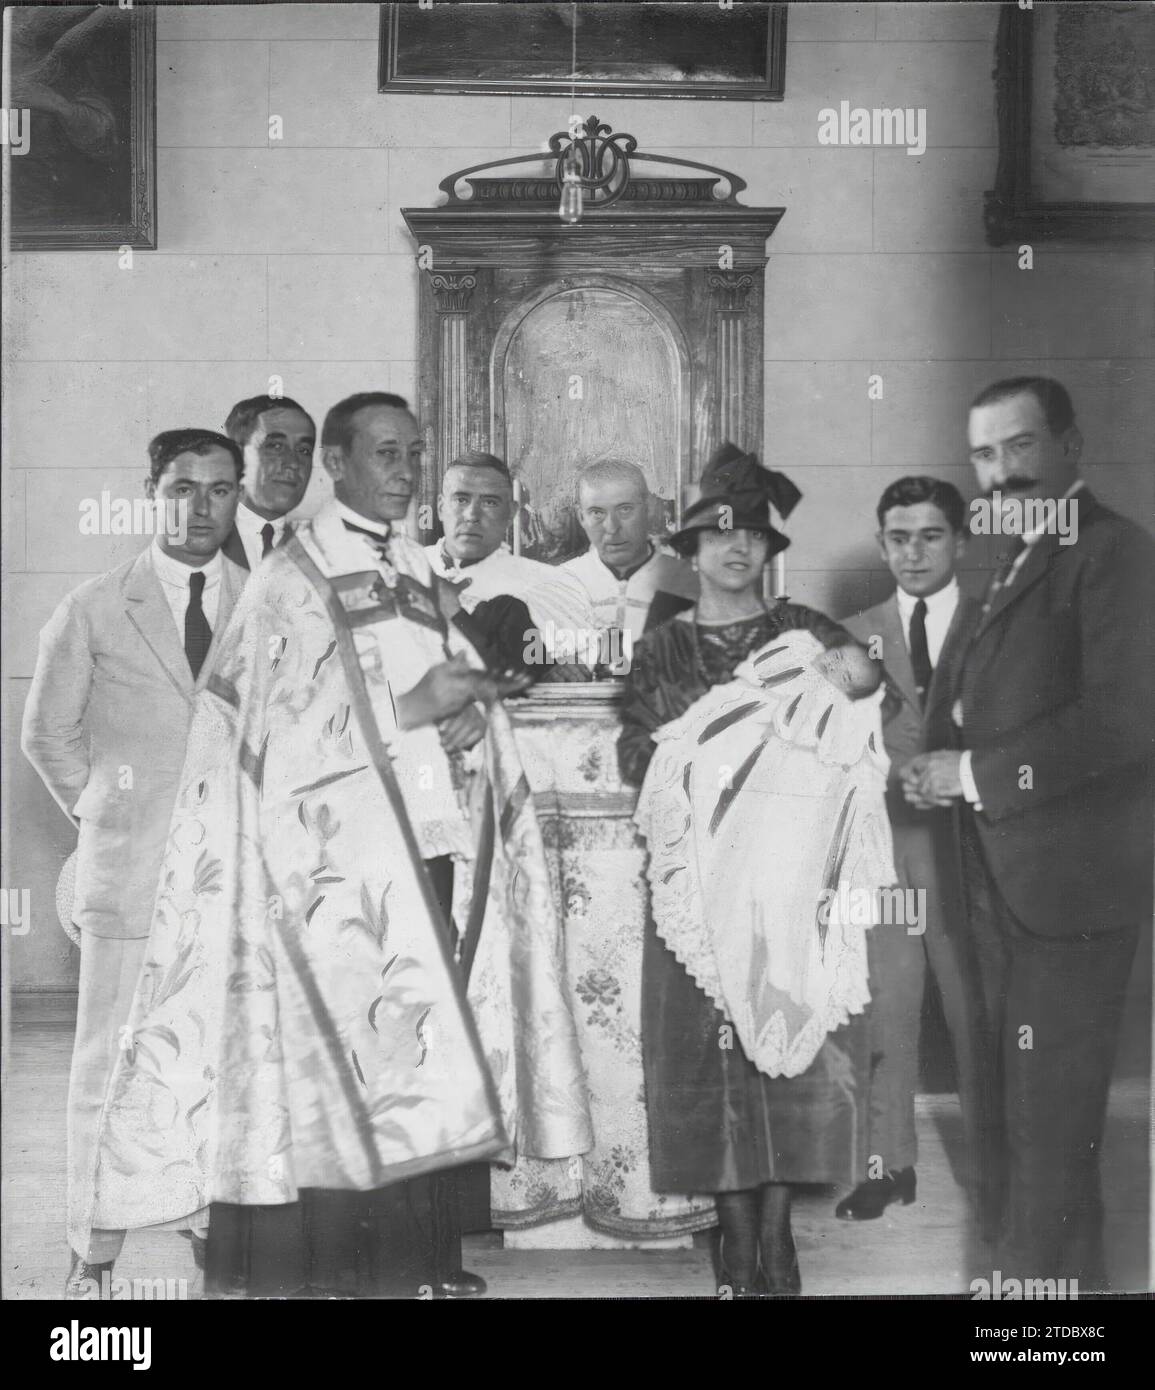 08/11/1919. Madrid. In the church of the Concepción. Baptism, Verified Yesterday, of the First-born Daughter of the bullfighter Juan Belmonte. Credit: Album / Archivo ABC / José Zegri Stock Photo